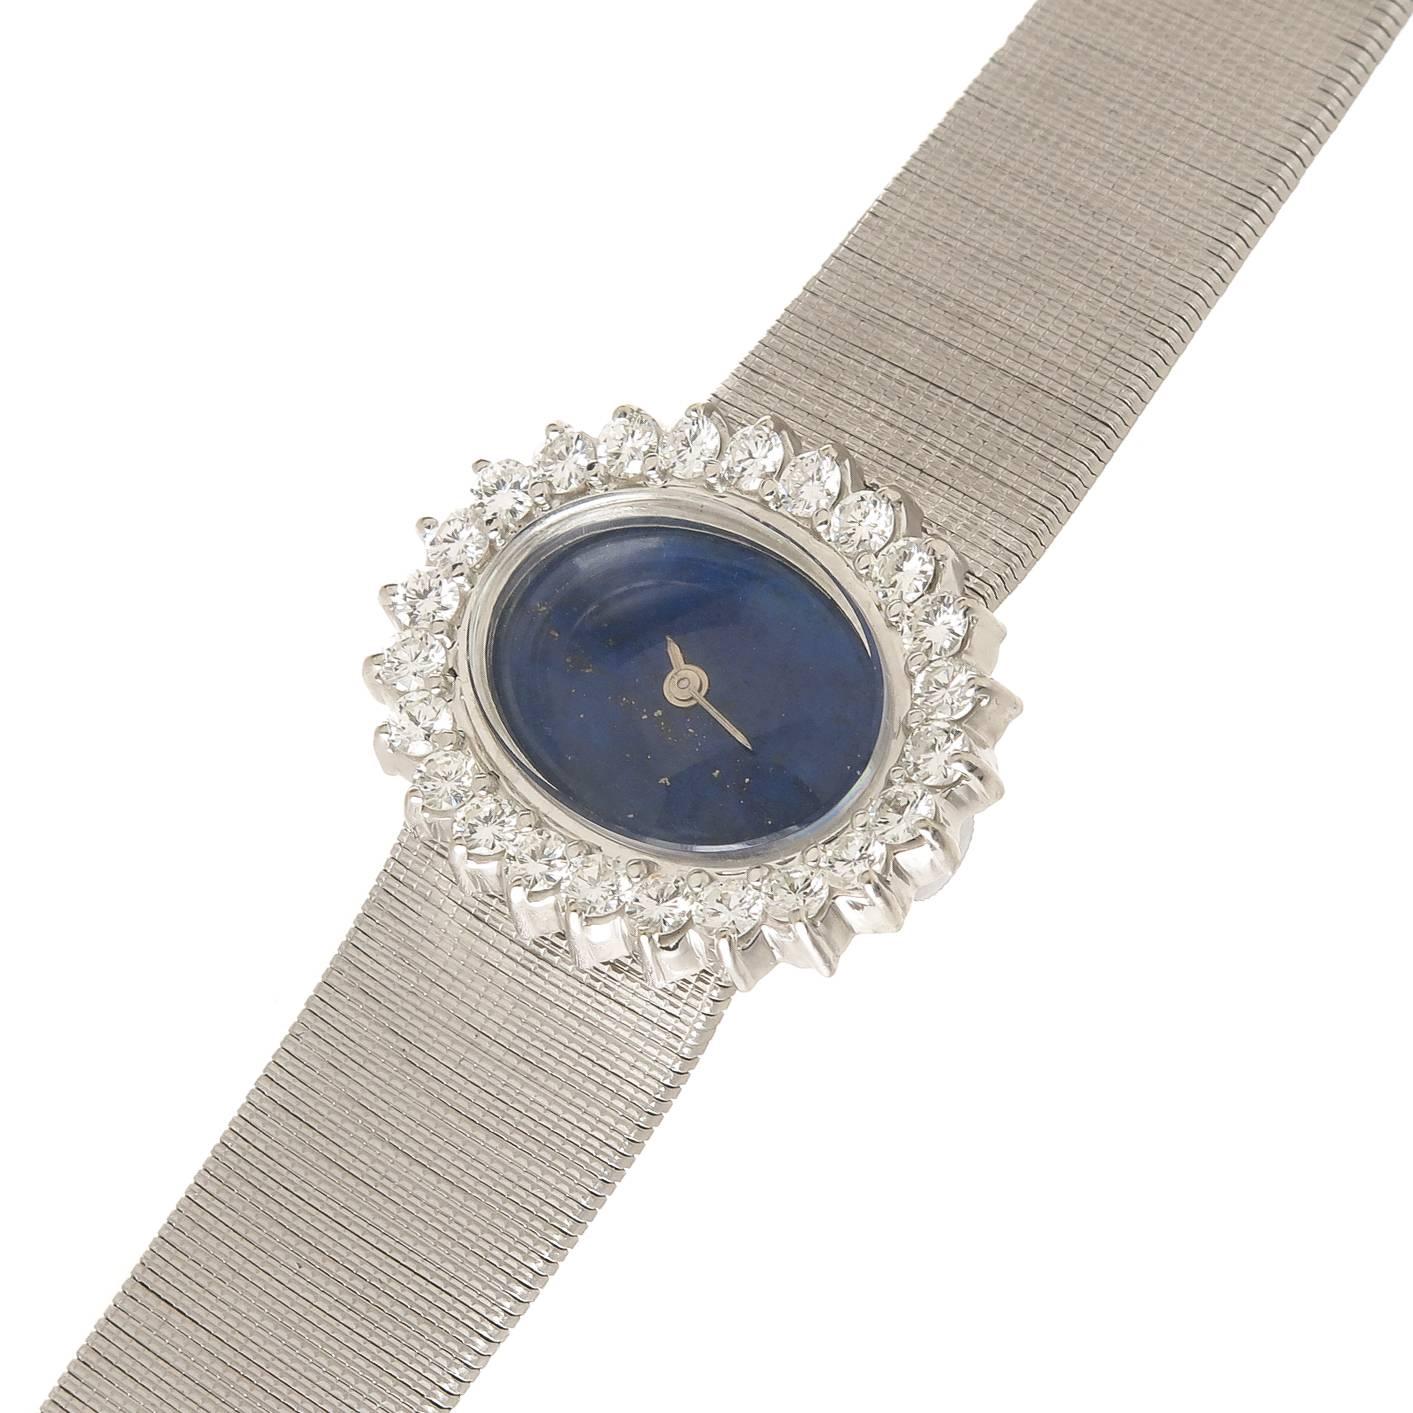 Circa 1970s 14k white Gold ladies watch by M & W Ullman, Switzerland, 17 jewel manual wind movement, lapis Lazuli Dial with White Gold hands. The watch measures 1 X 3/4 inch oval and is set with 24 Round Brilliant cut Diamonds totaling 1.70 carat